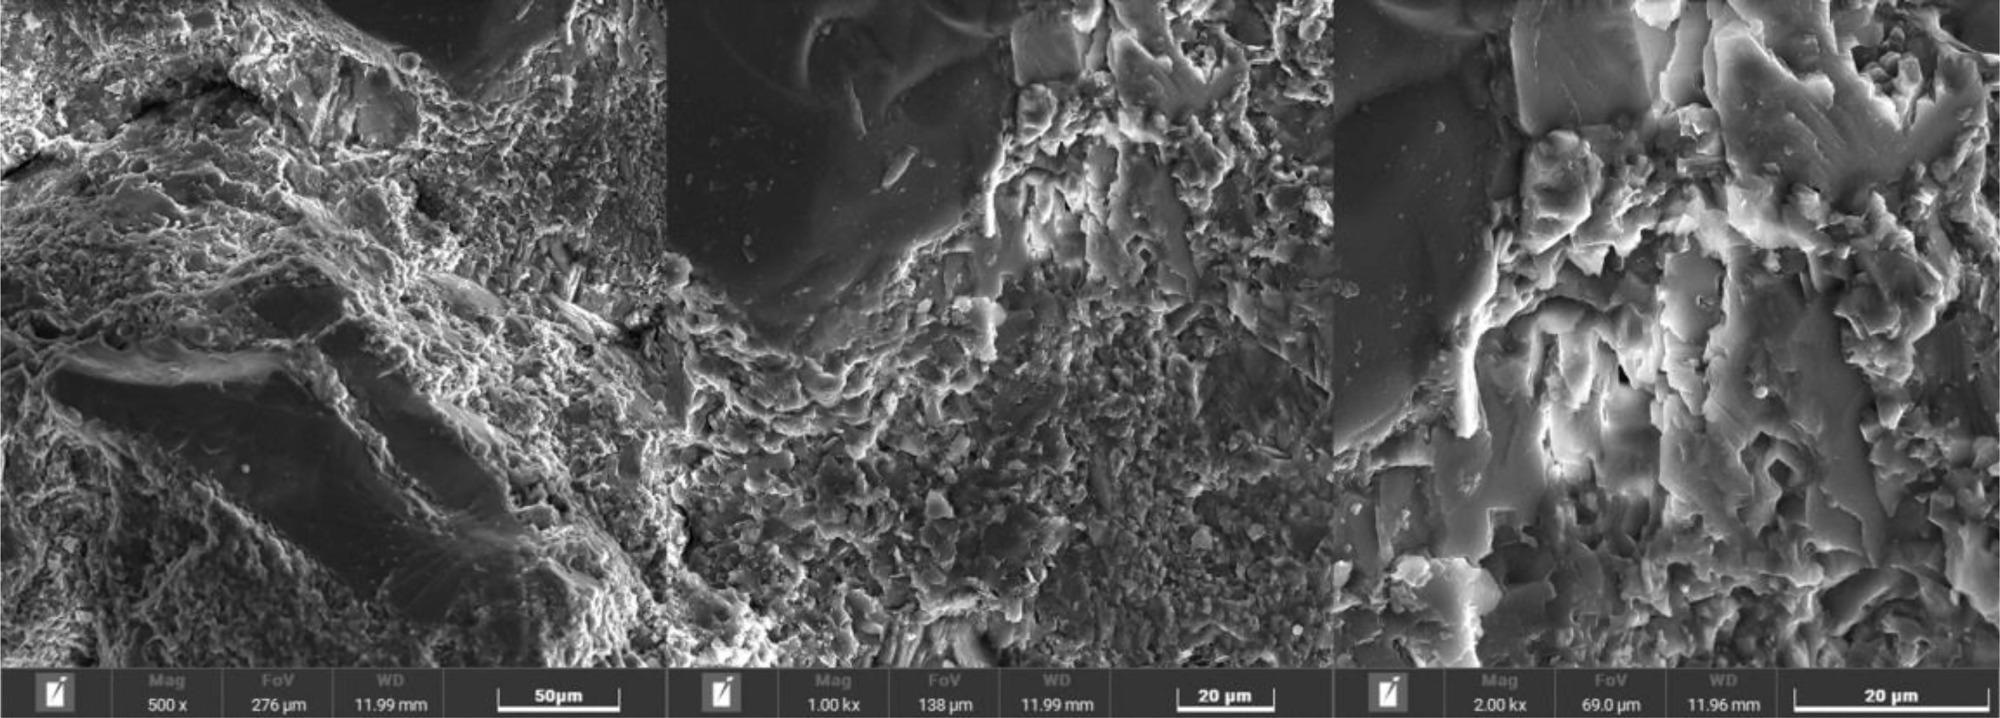 SEM images of the rock samples at different magnifications.